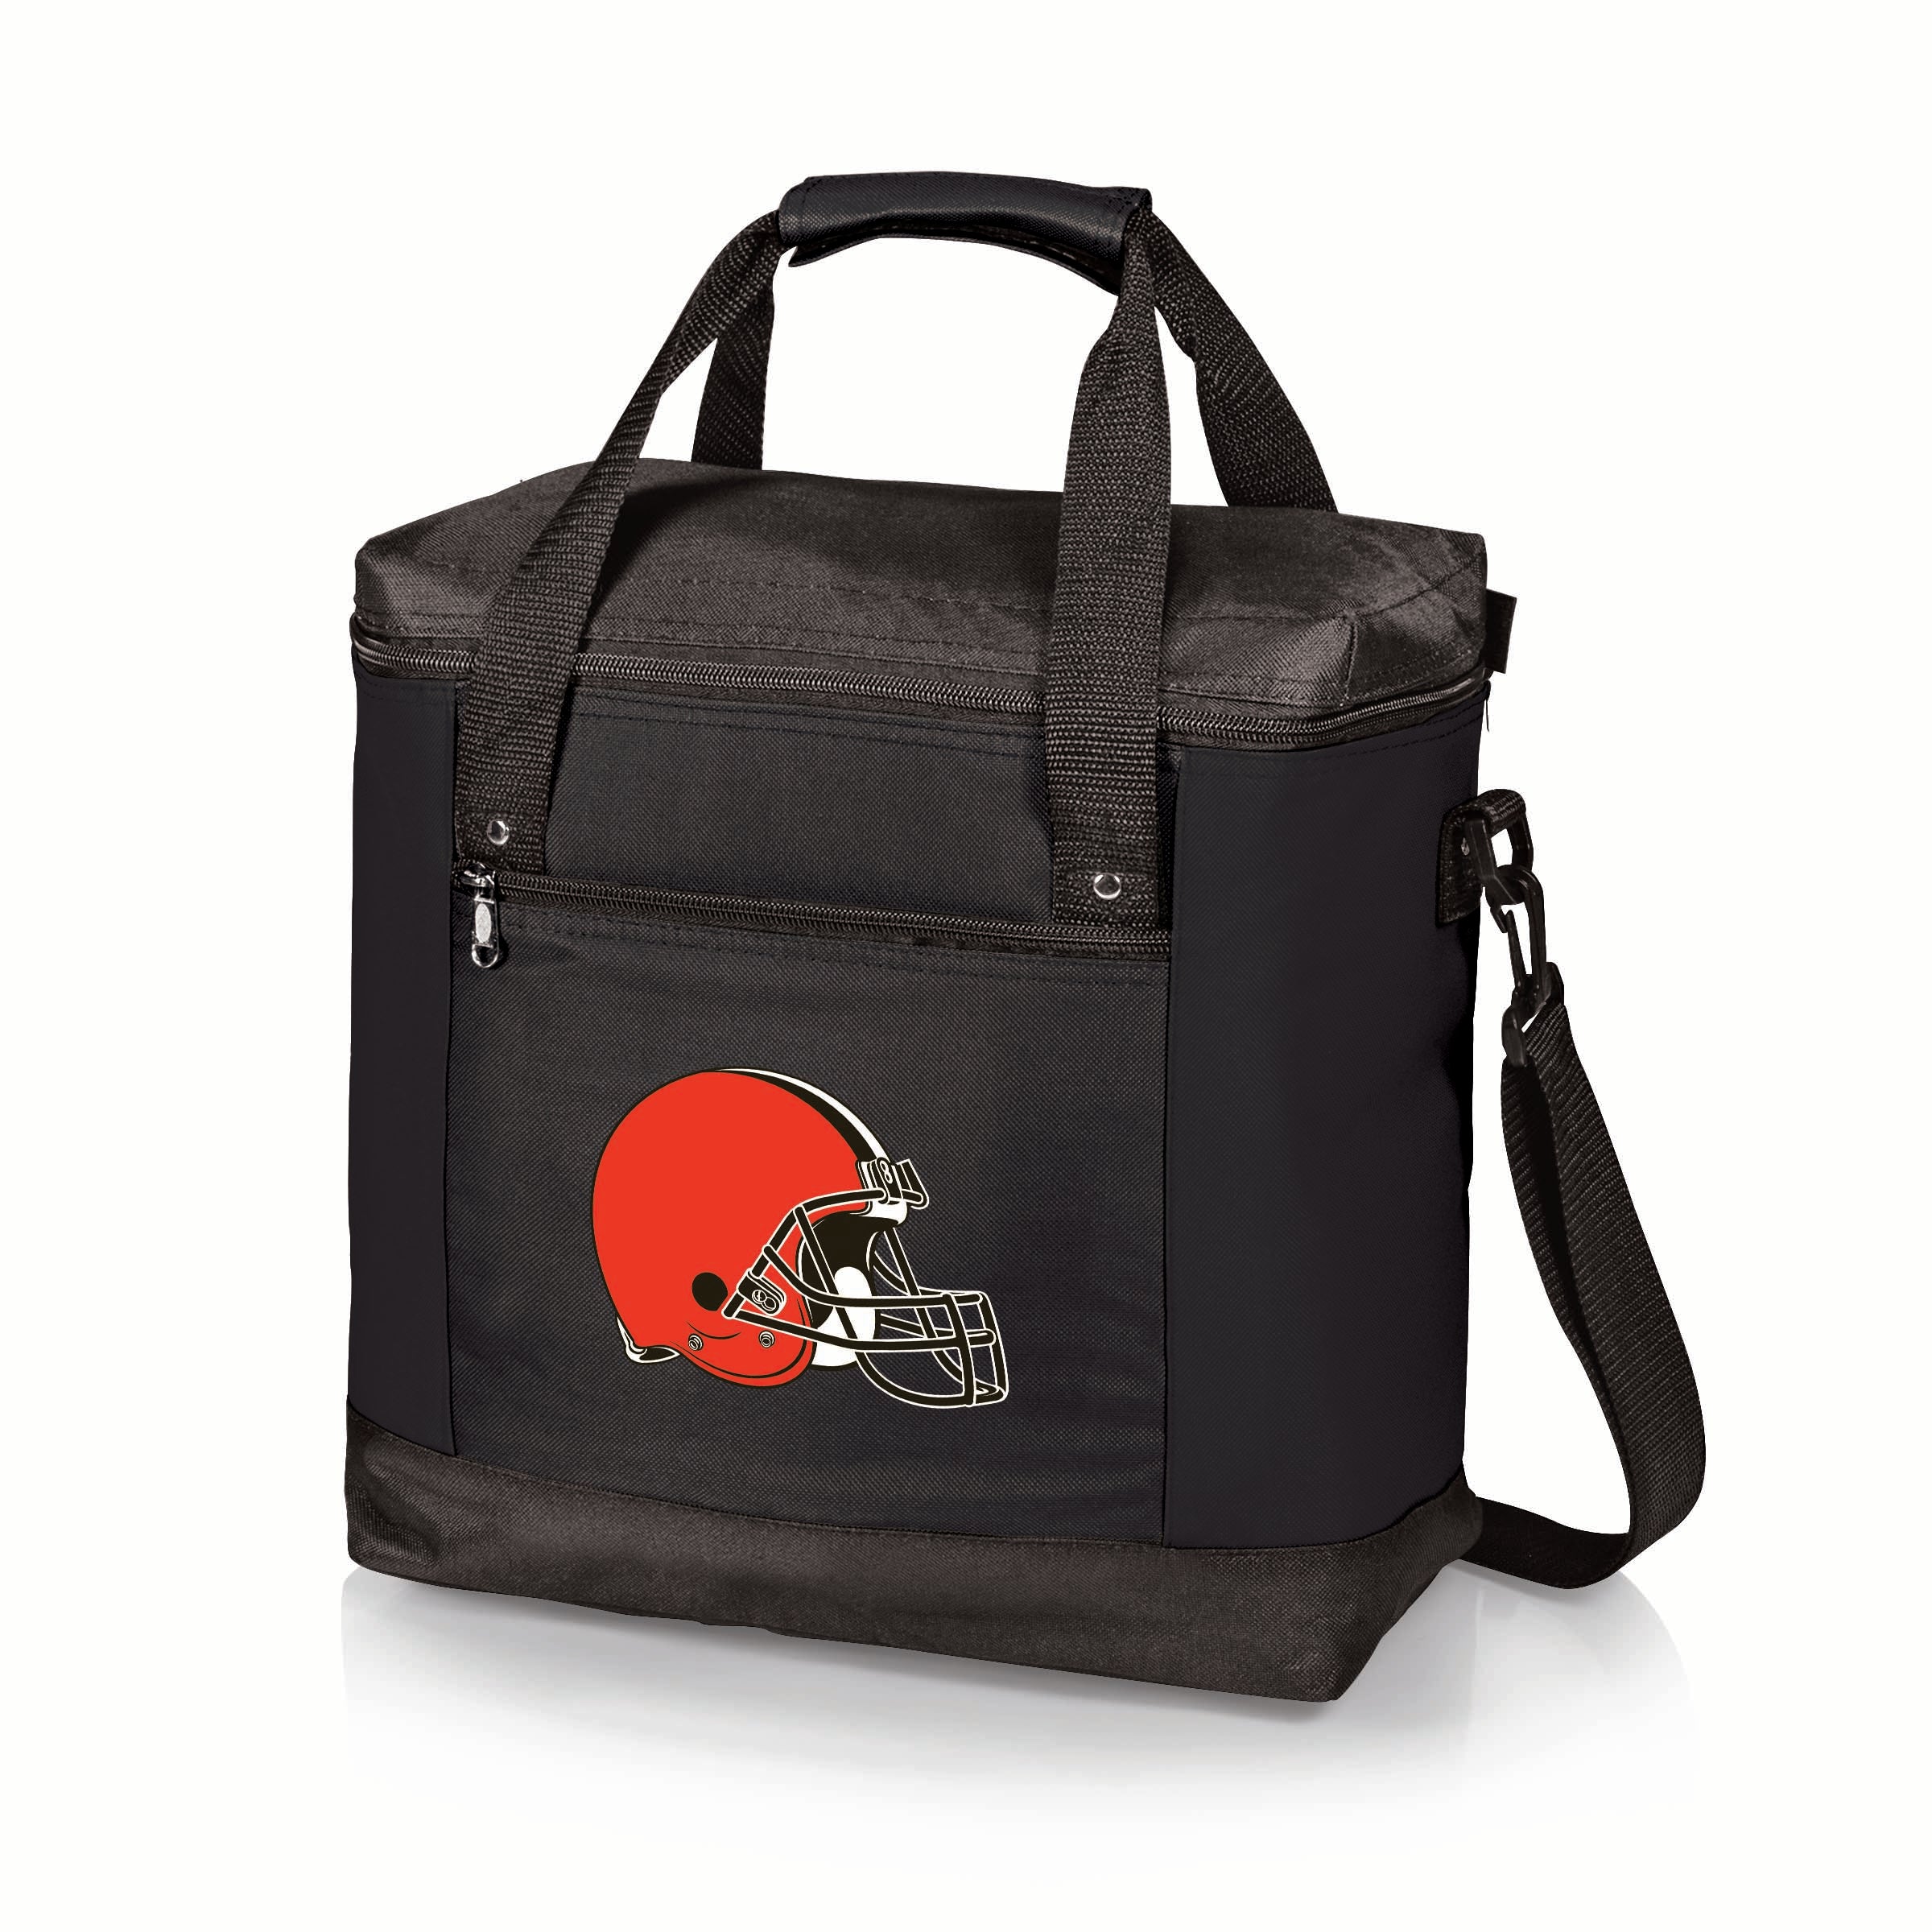 Cleveland Browns - Montero Cooler Tote Bag